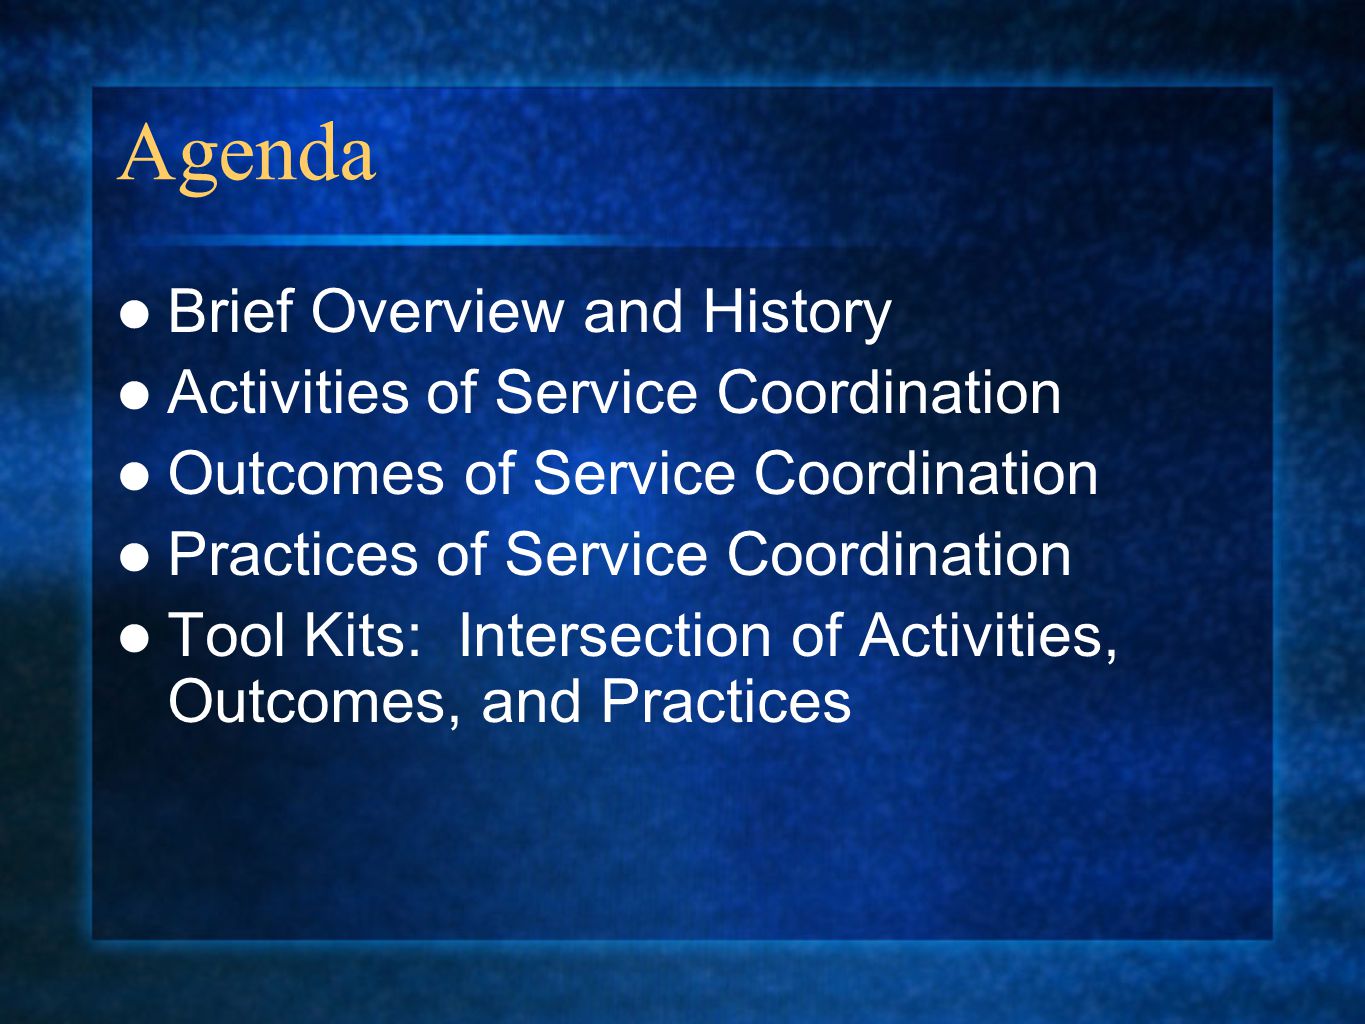 Agenda Brief Overview and History Activities of Service Coordination Outcomes of Service Coordination Practices of Service Coordination Tool Kits: Intersection of Activities, Outcomes, and Practices